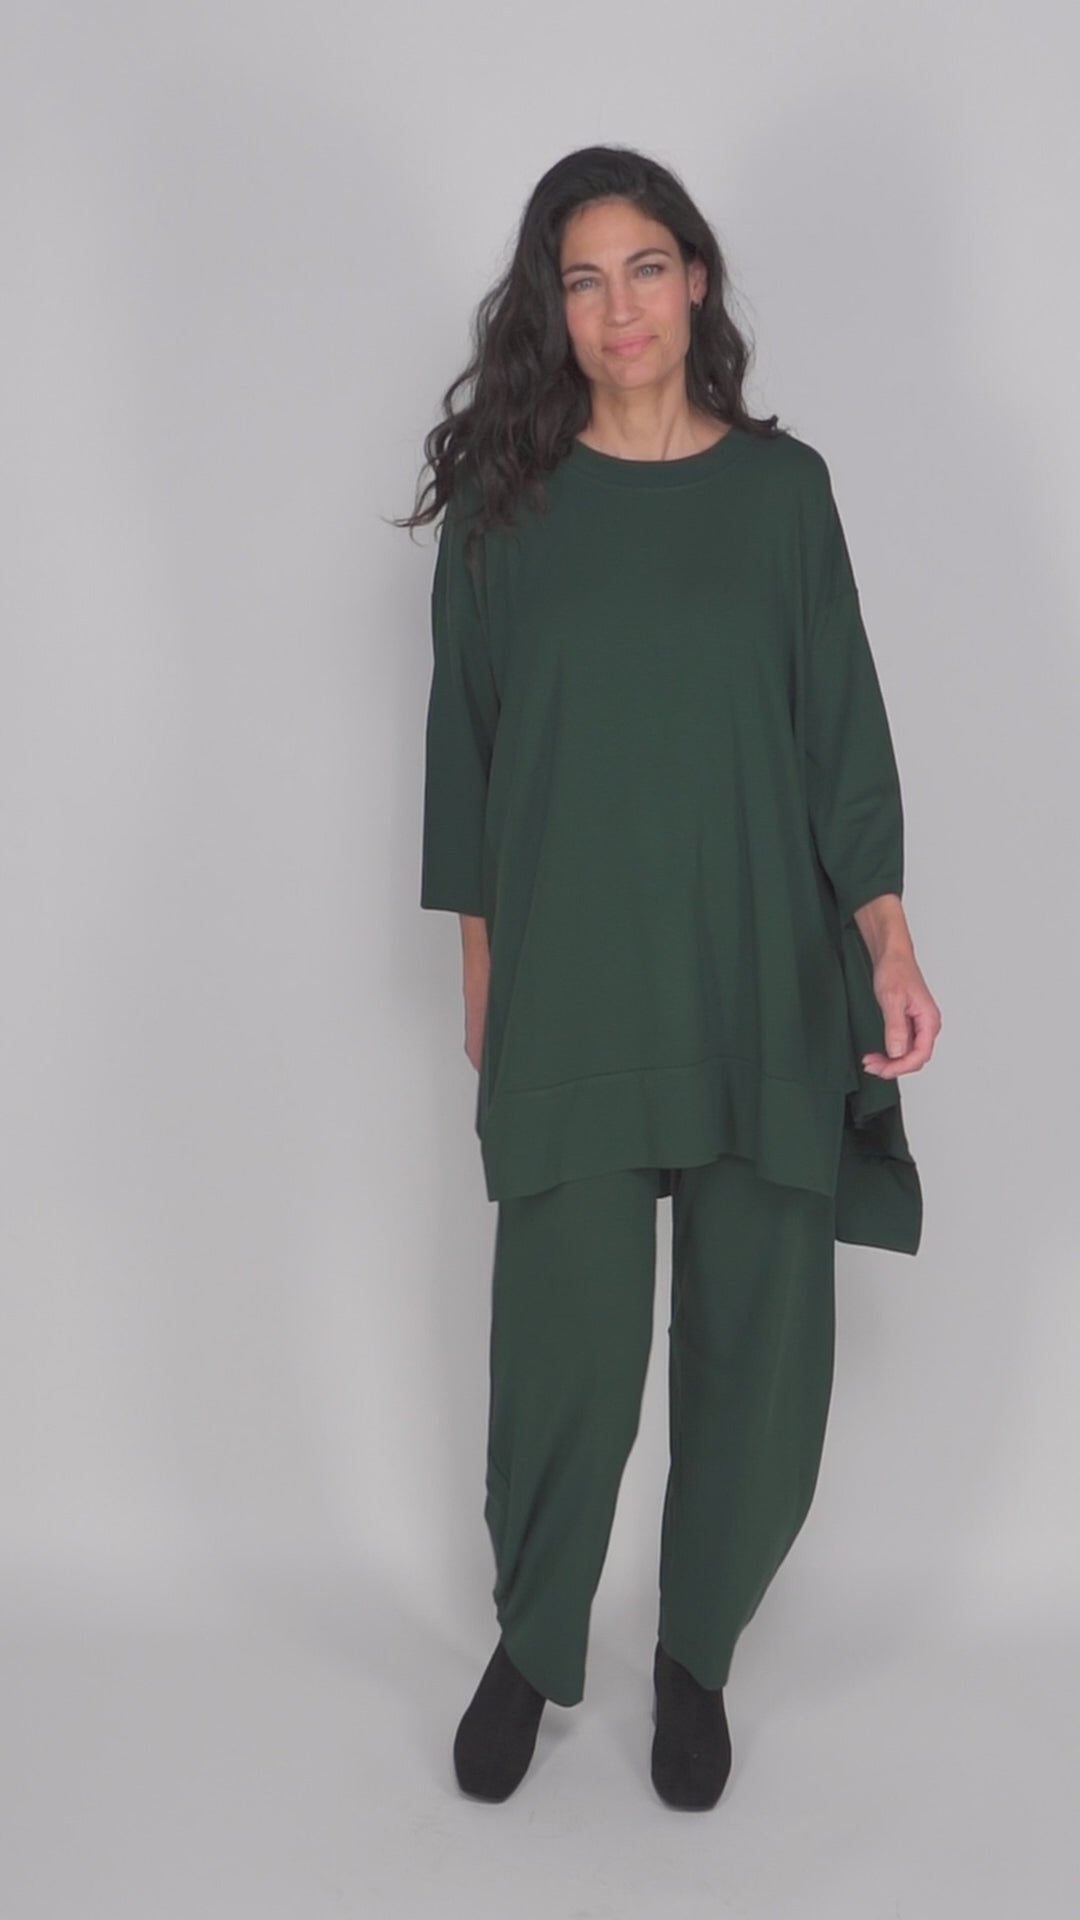 Essential Oversized Trapeze Top, Green